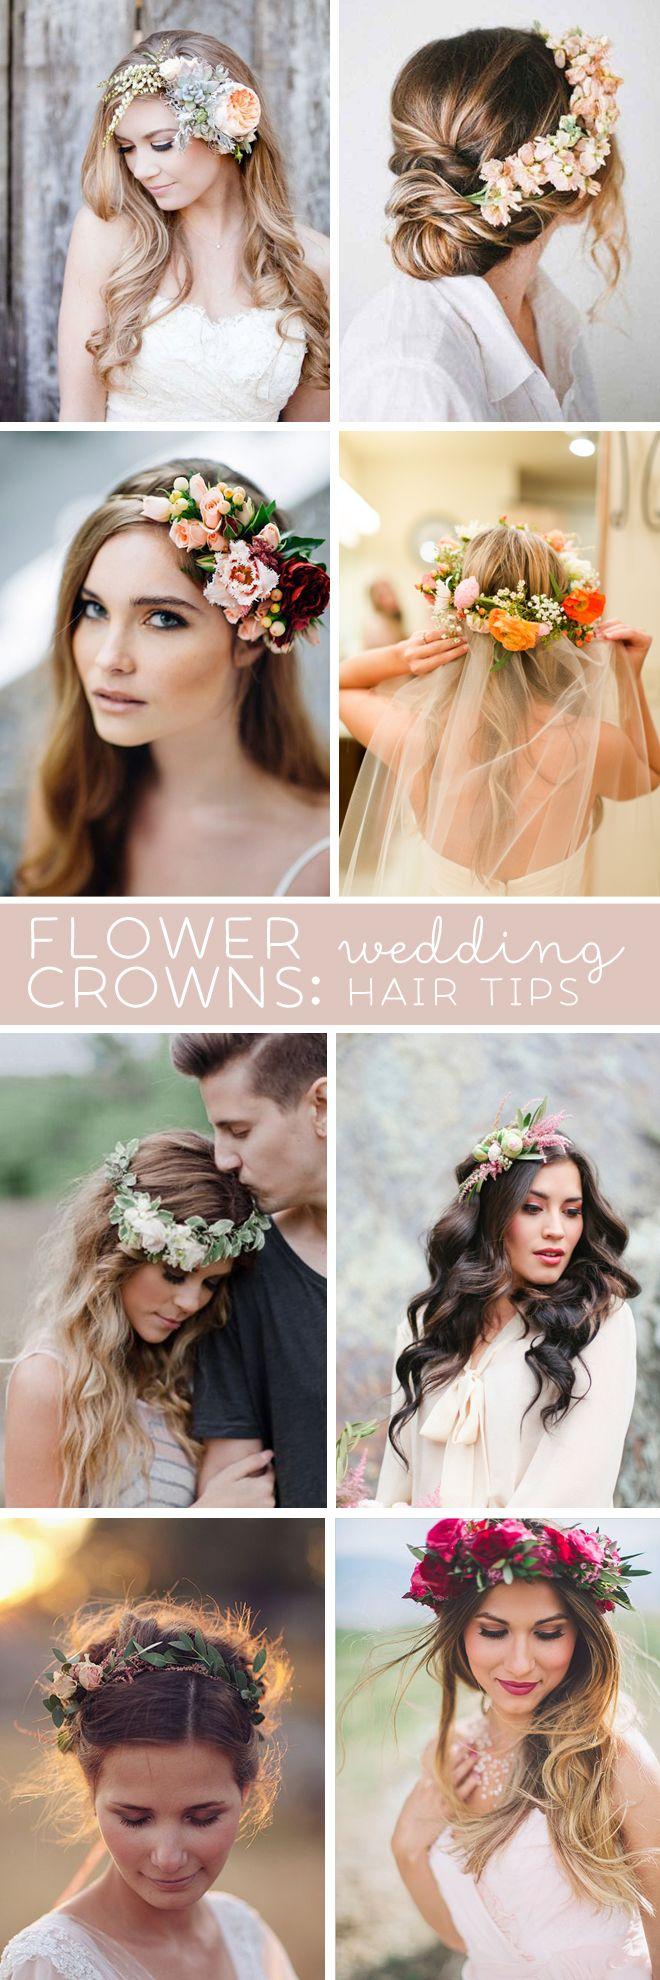 Свадьба - Awesome Wedding Hair Tips For Wearing Flower Crowns!